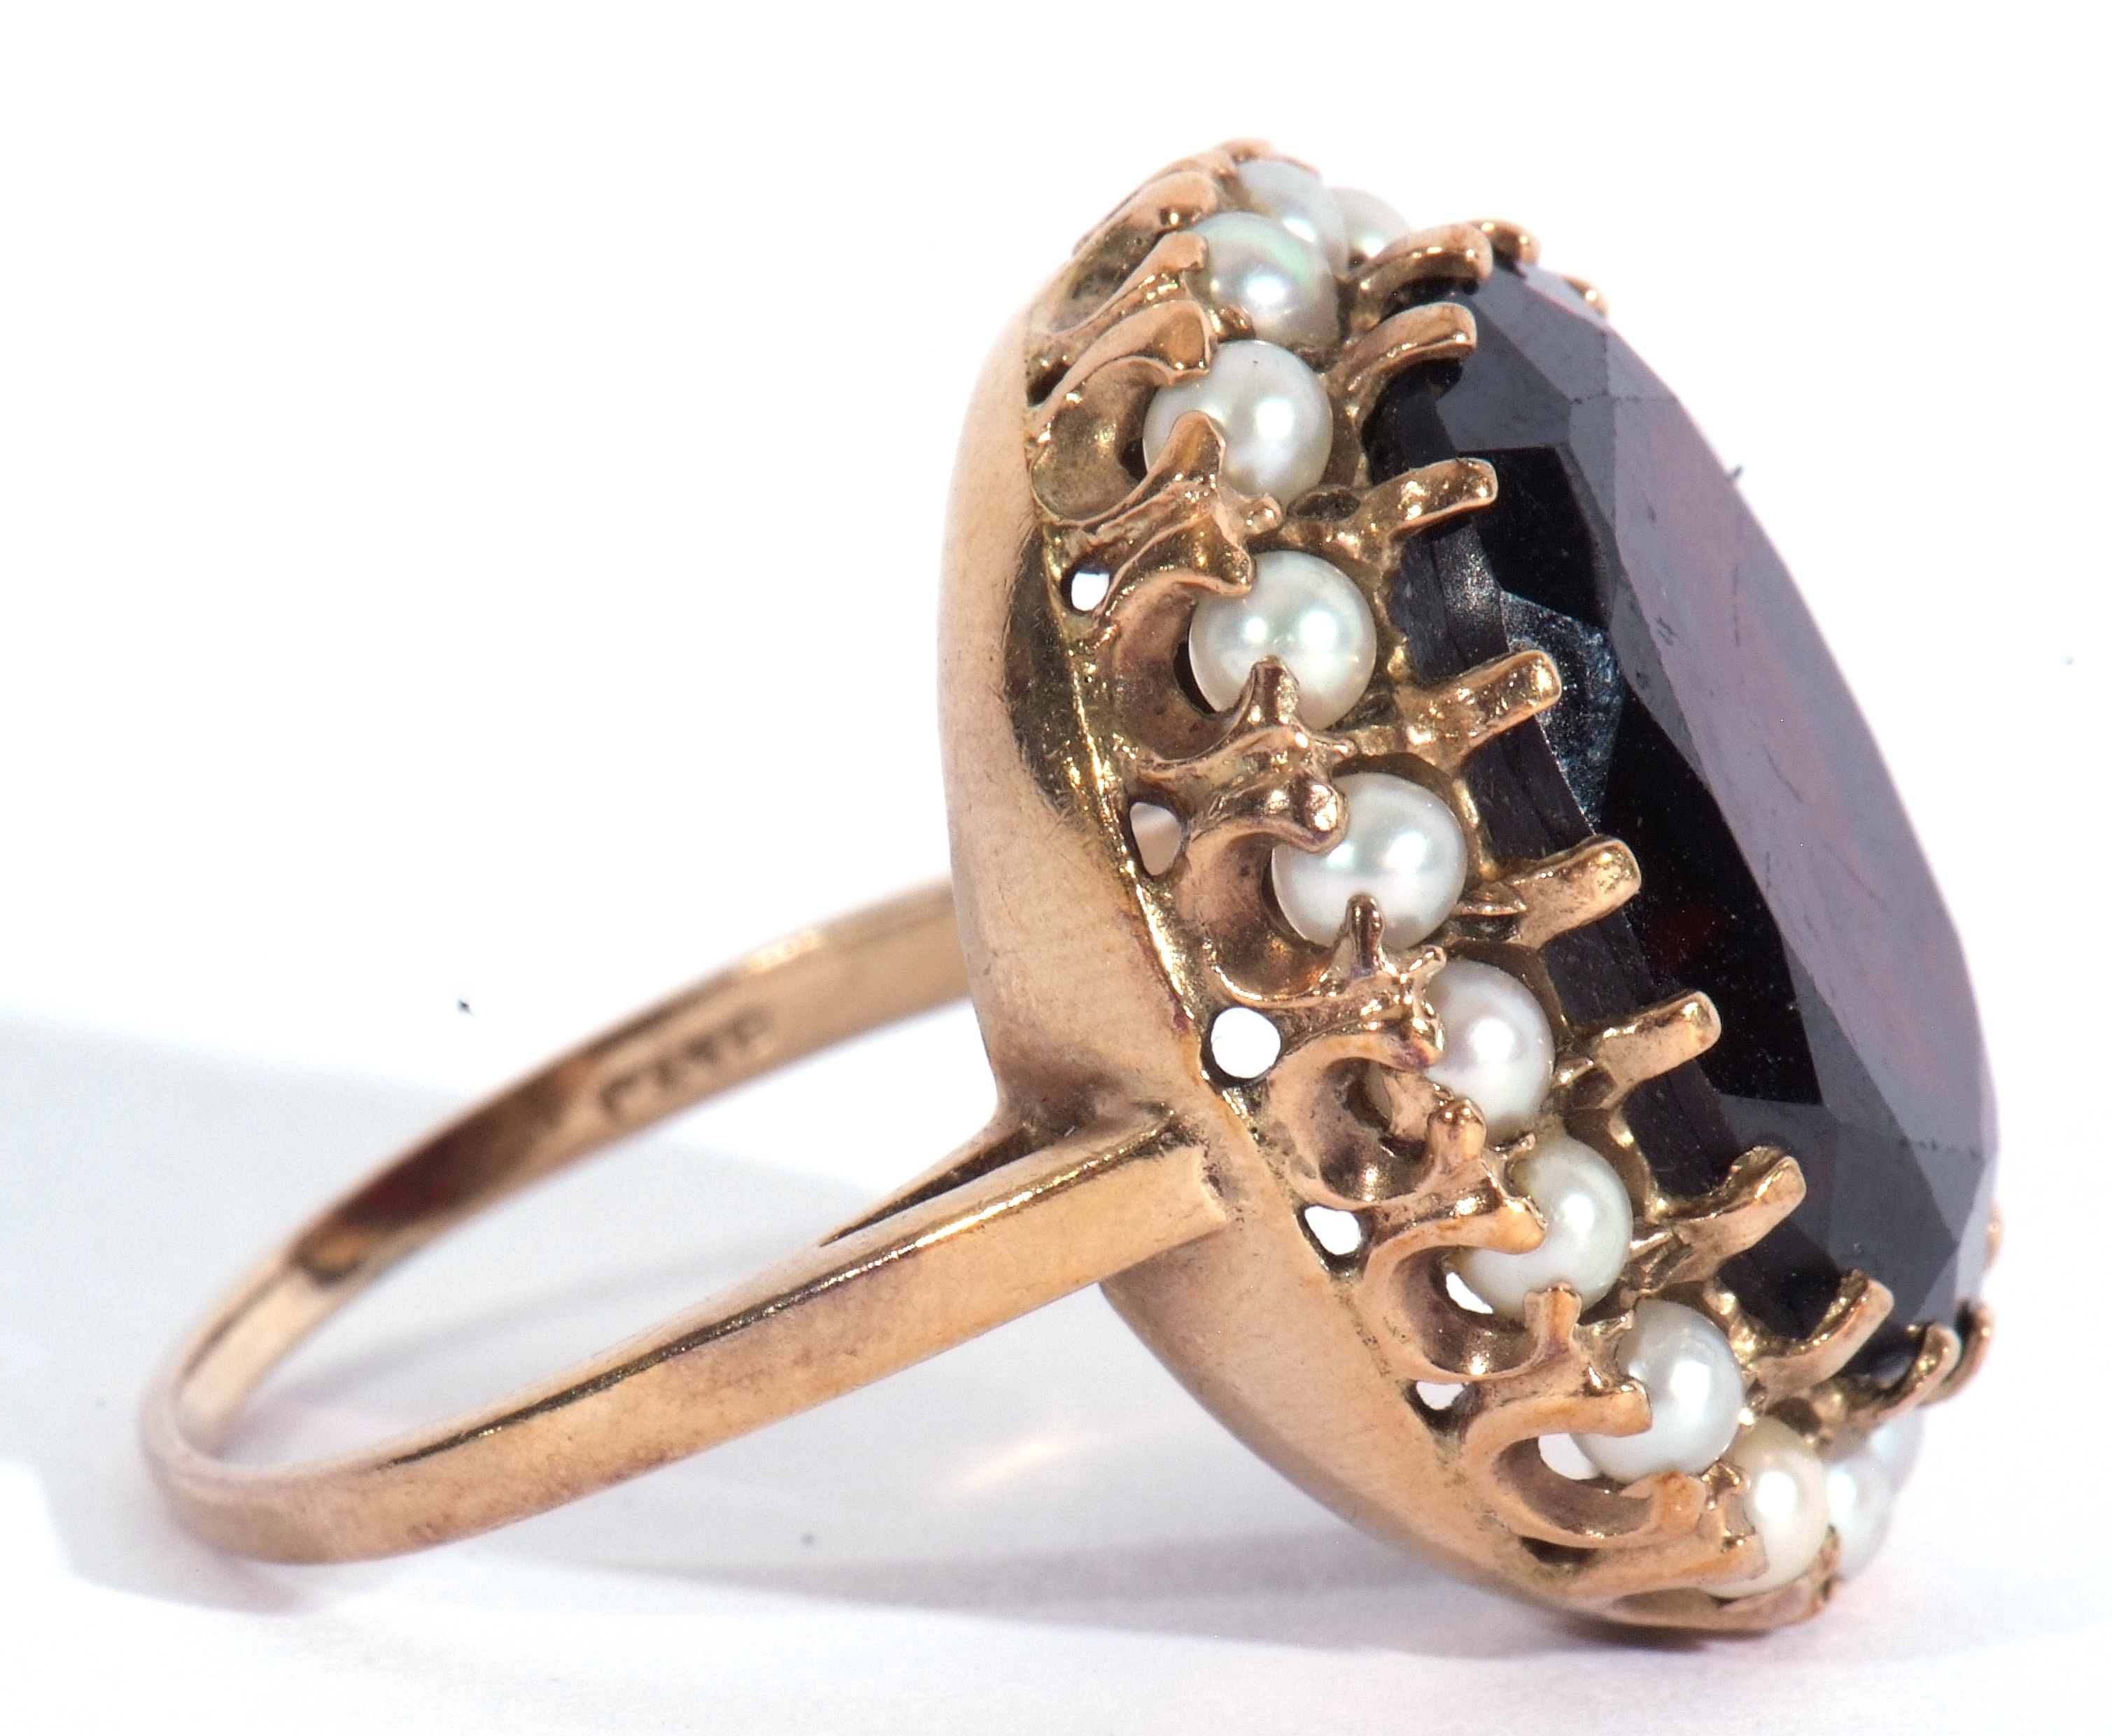 Modern 9ct gold dress ring, a large red paste faceted stone, 18 x 12mm, within a seed pearl - Image 7 of 9